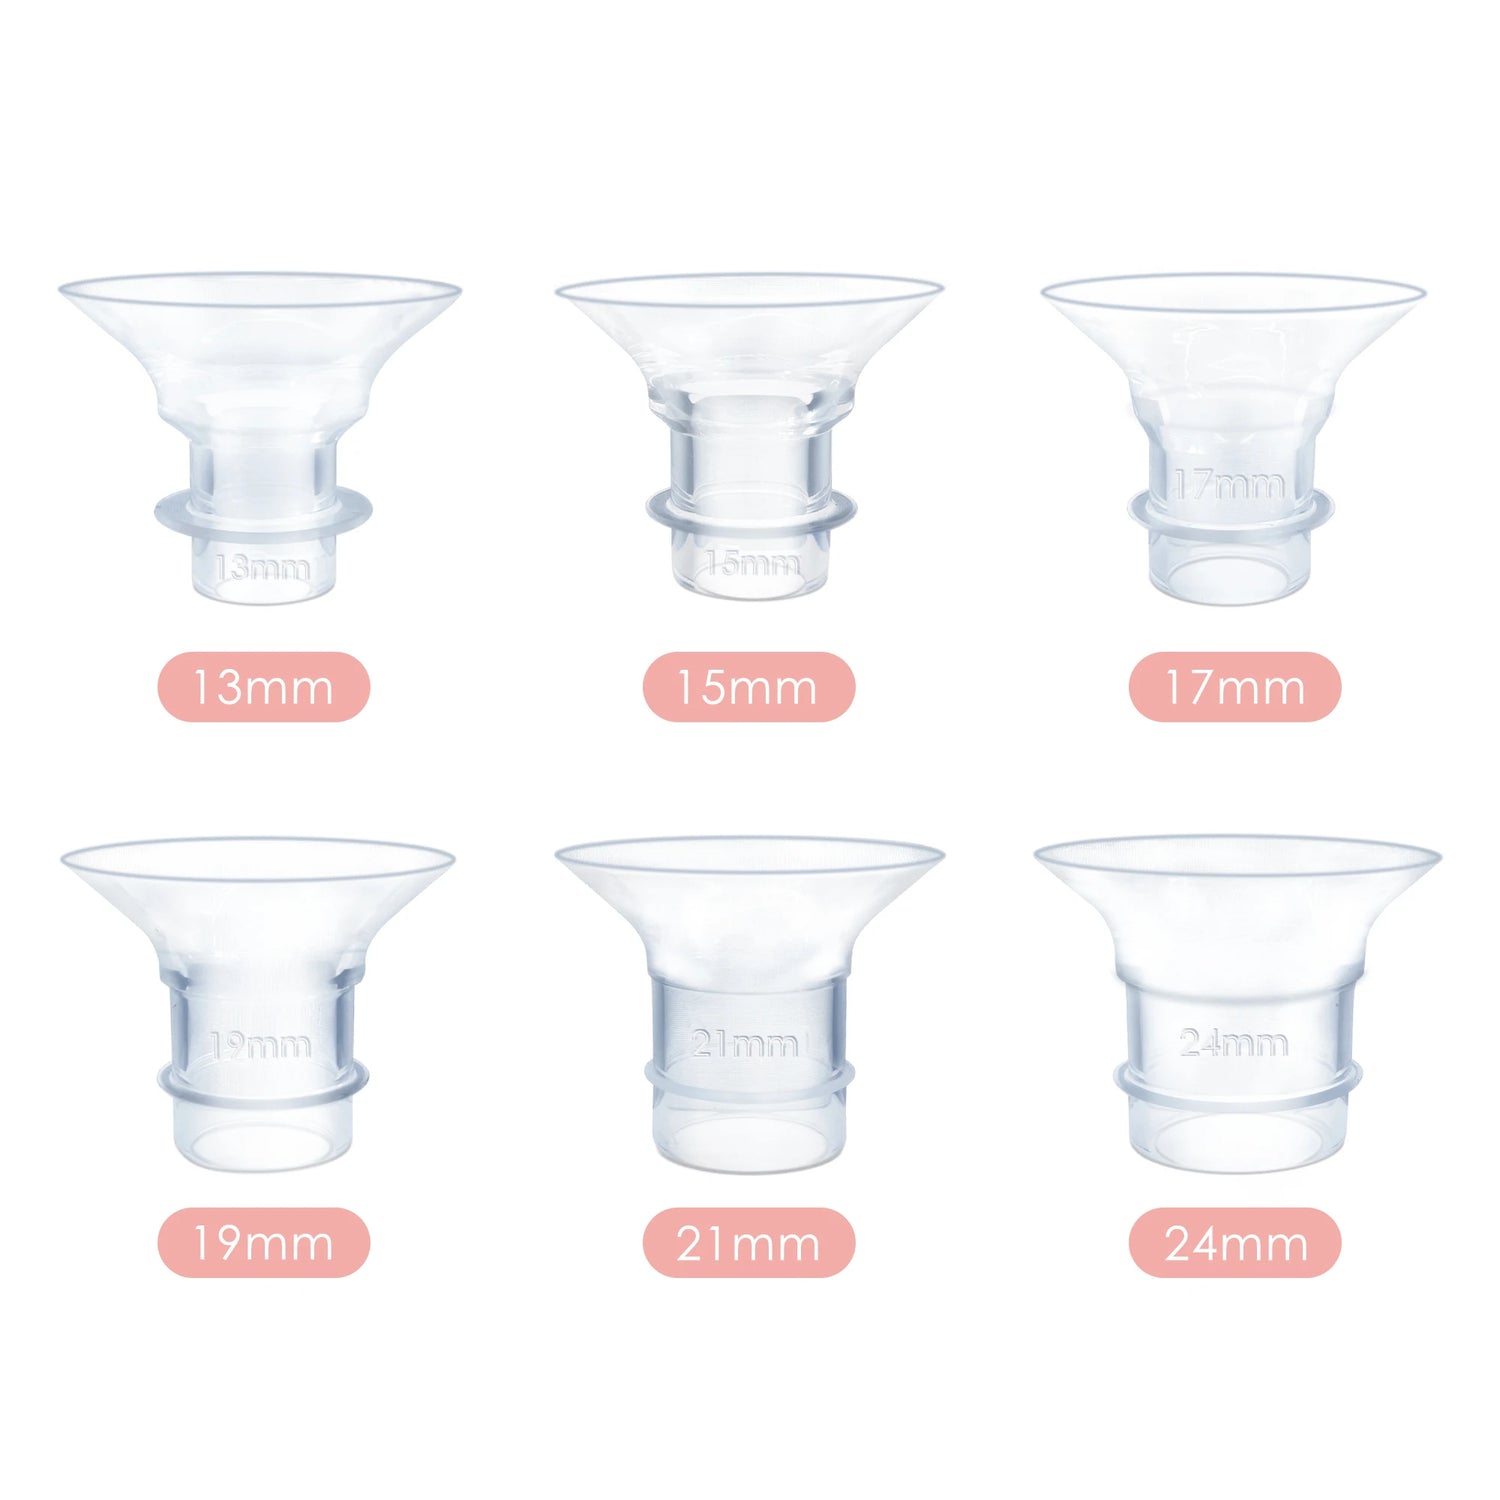 Golden Meadow Soft Fit Silicon Breast Pump Inserts